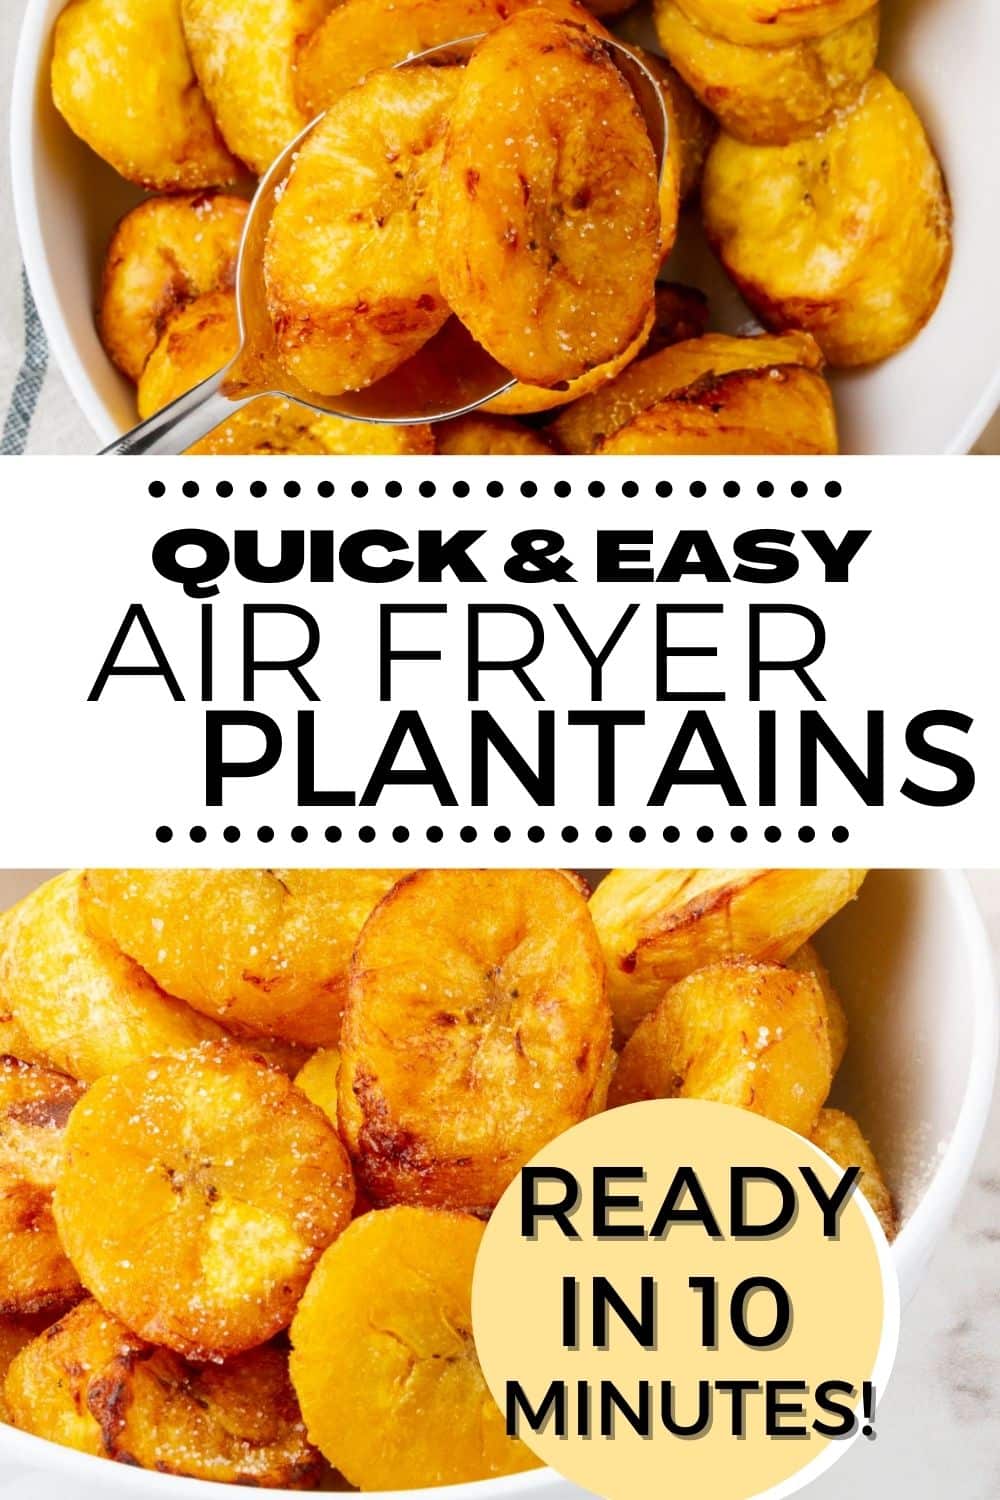 Sweet, ripe, plantains cook up quickly and easily in the air fryer to be crispy on the outside, tender on the inside, and delicious as a snack or side dish. #airfryer #plantains via @vegetarianmamma